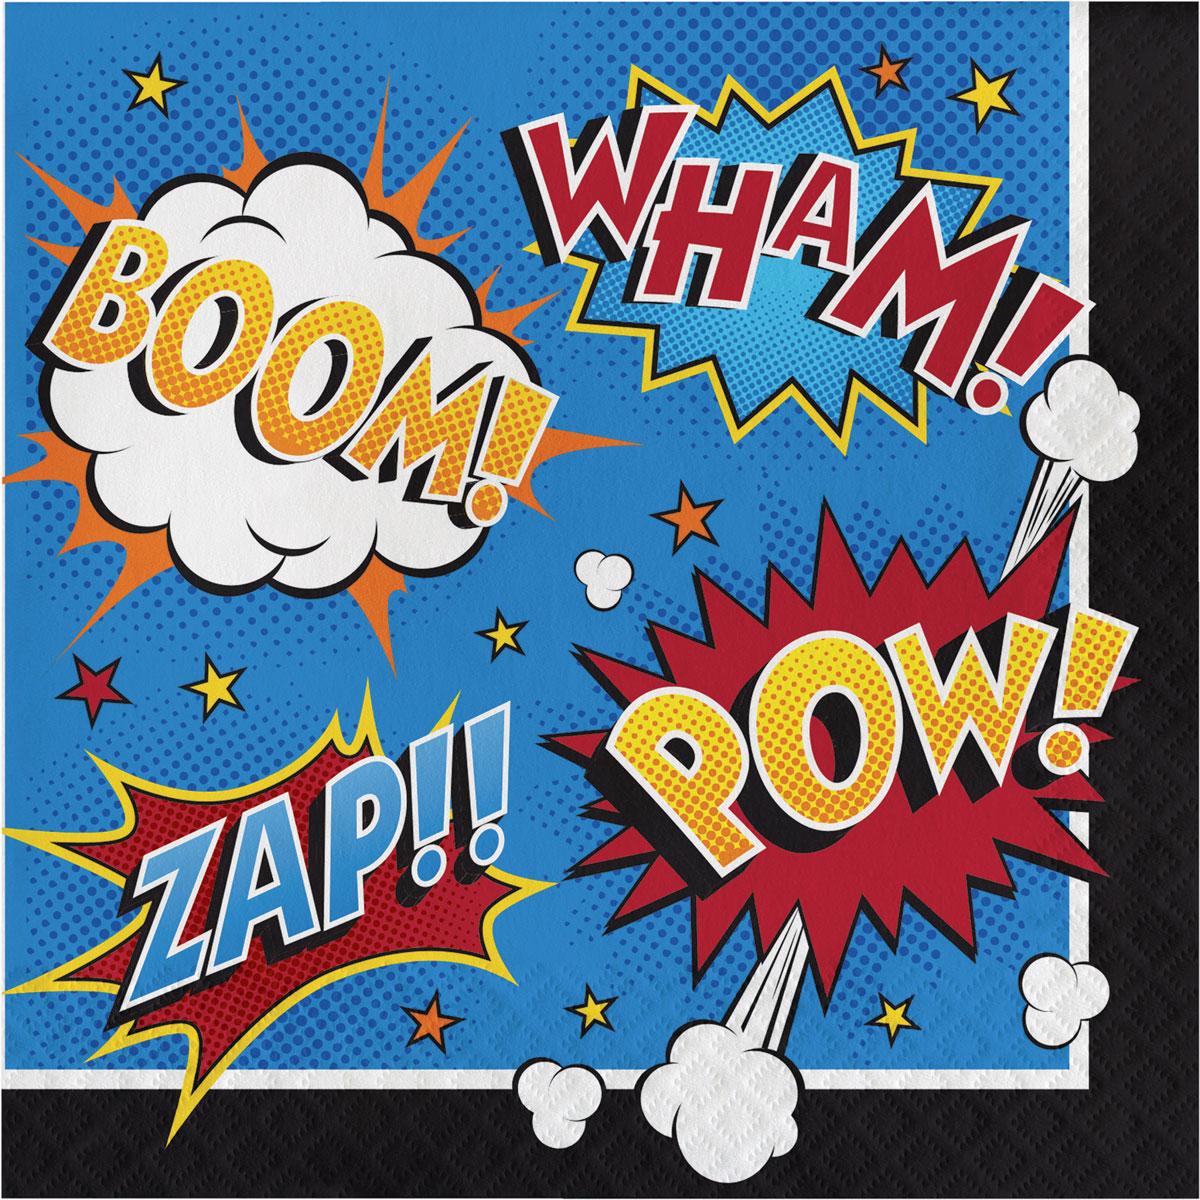 Superhero Slogan Paper Napkins in packs 16 2ply and measuring 33cm by Creative Party 324837 available here at Karnival Costumes online party shop